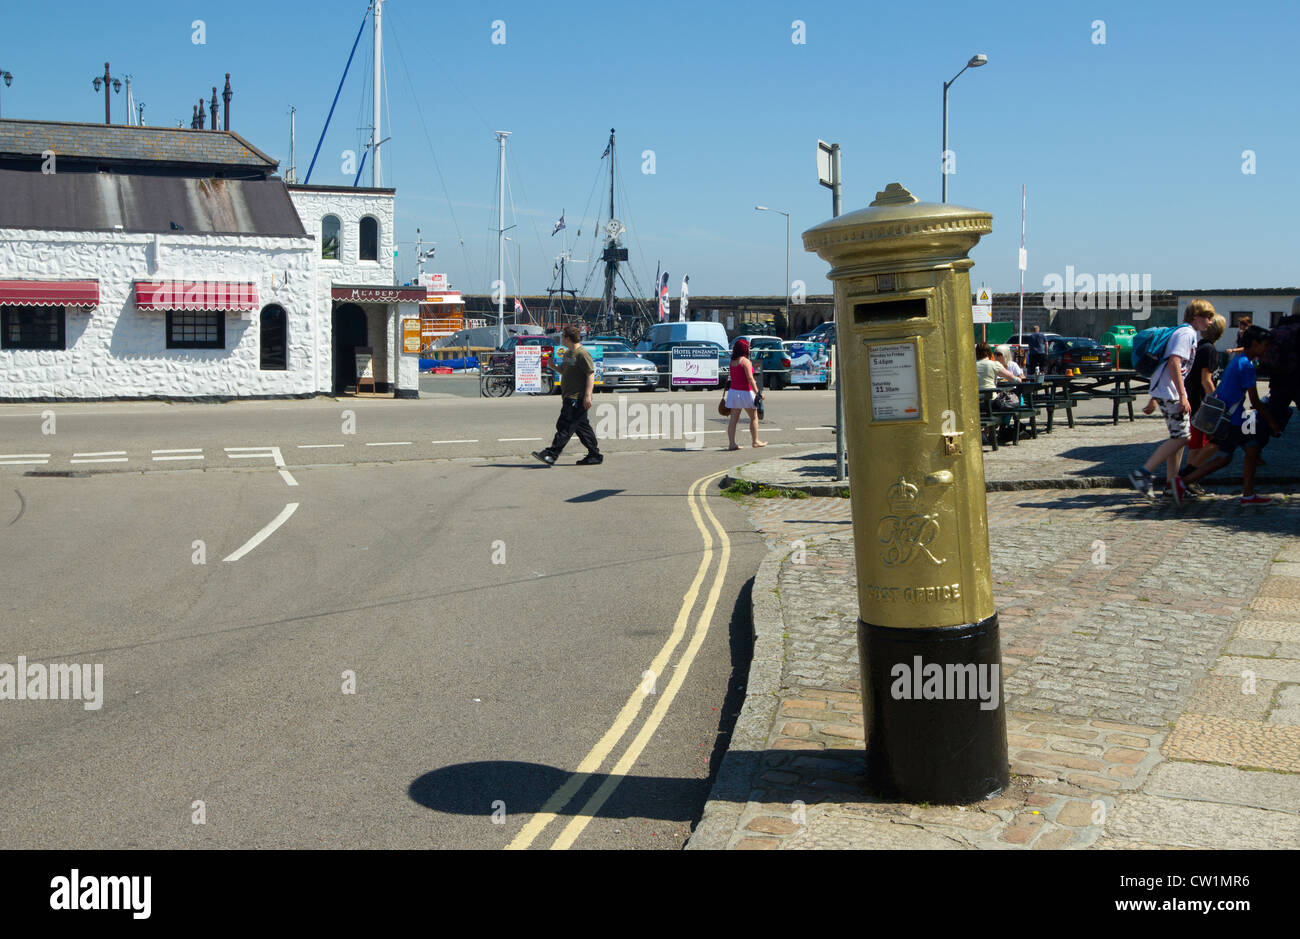 Royal Mail post box painted gold in honour of Helen Glover, 2012 London Olympics gold medal winner.  Penzance UK. Stock Photo